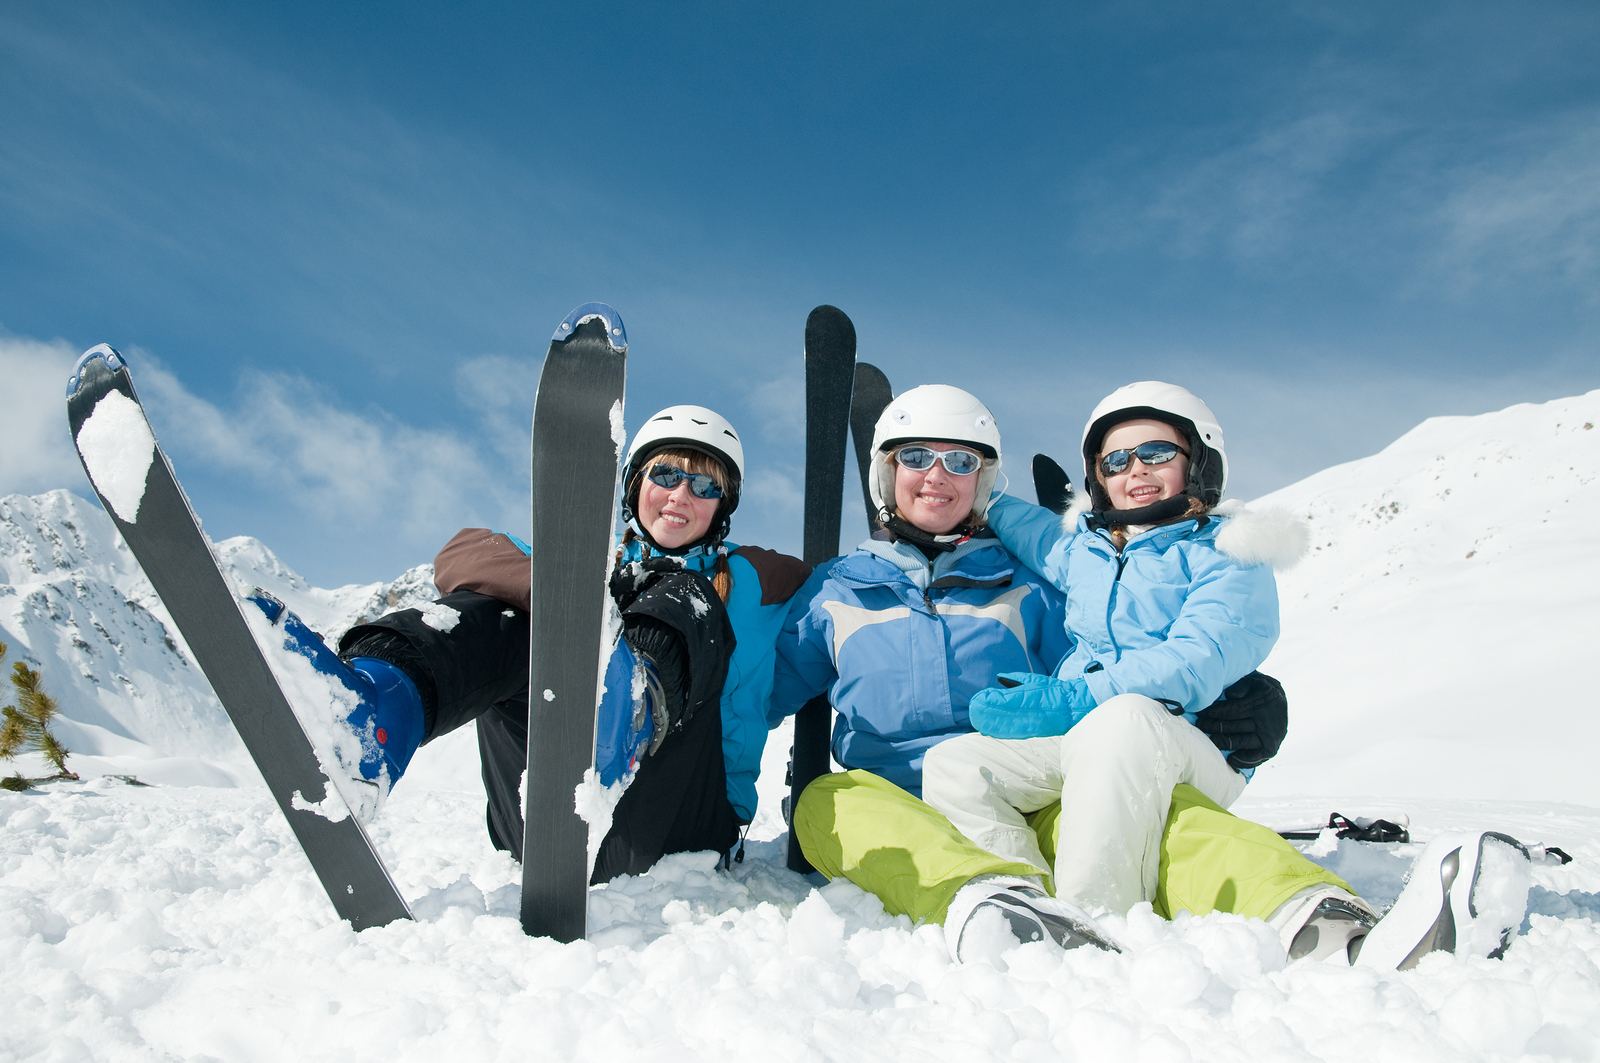 Skiing on a Budget with Family